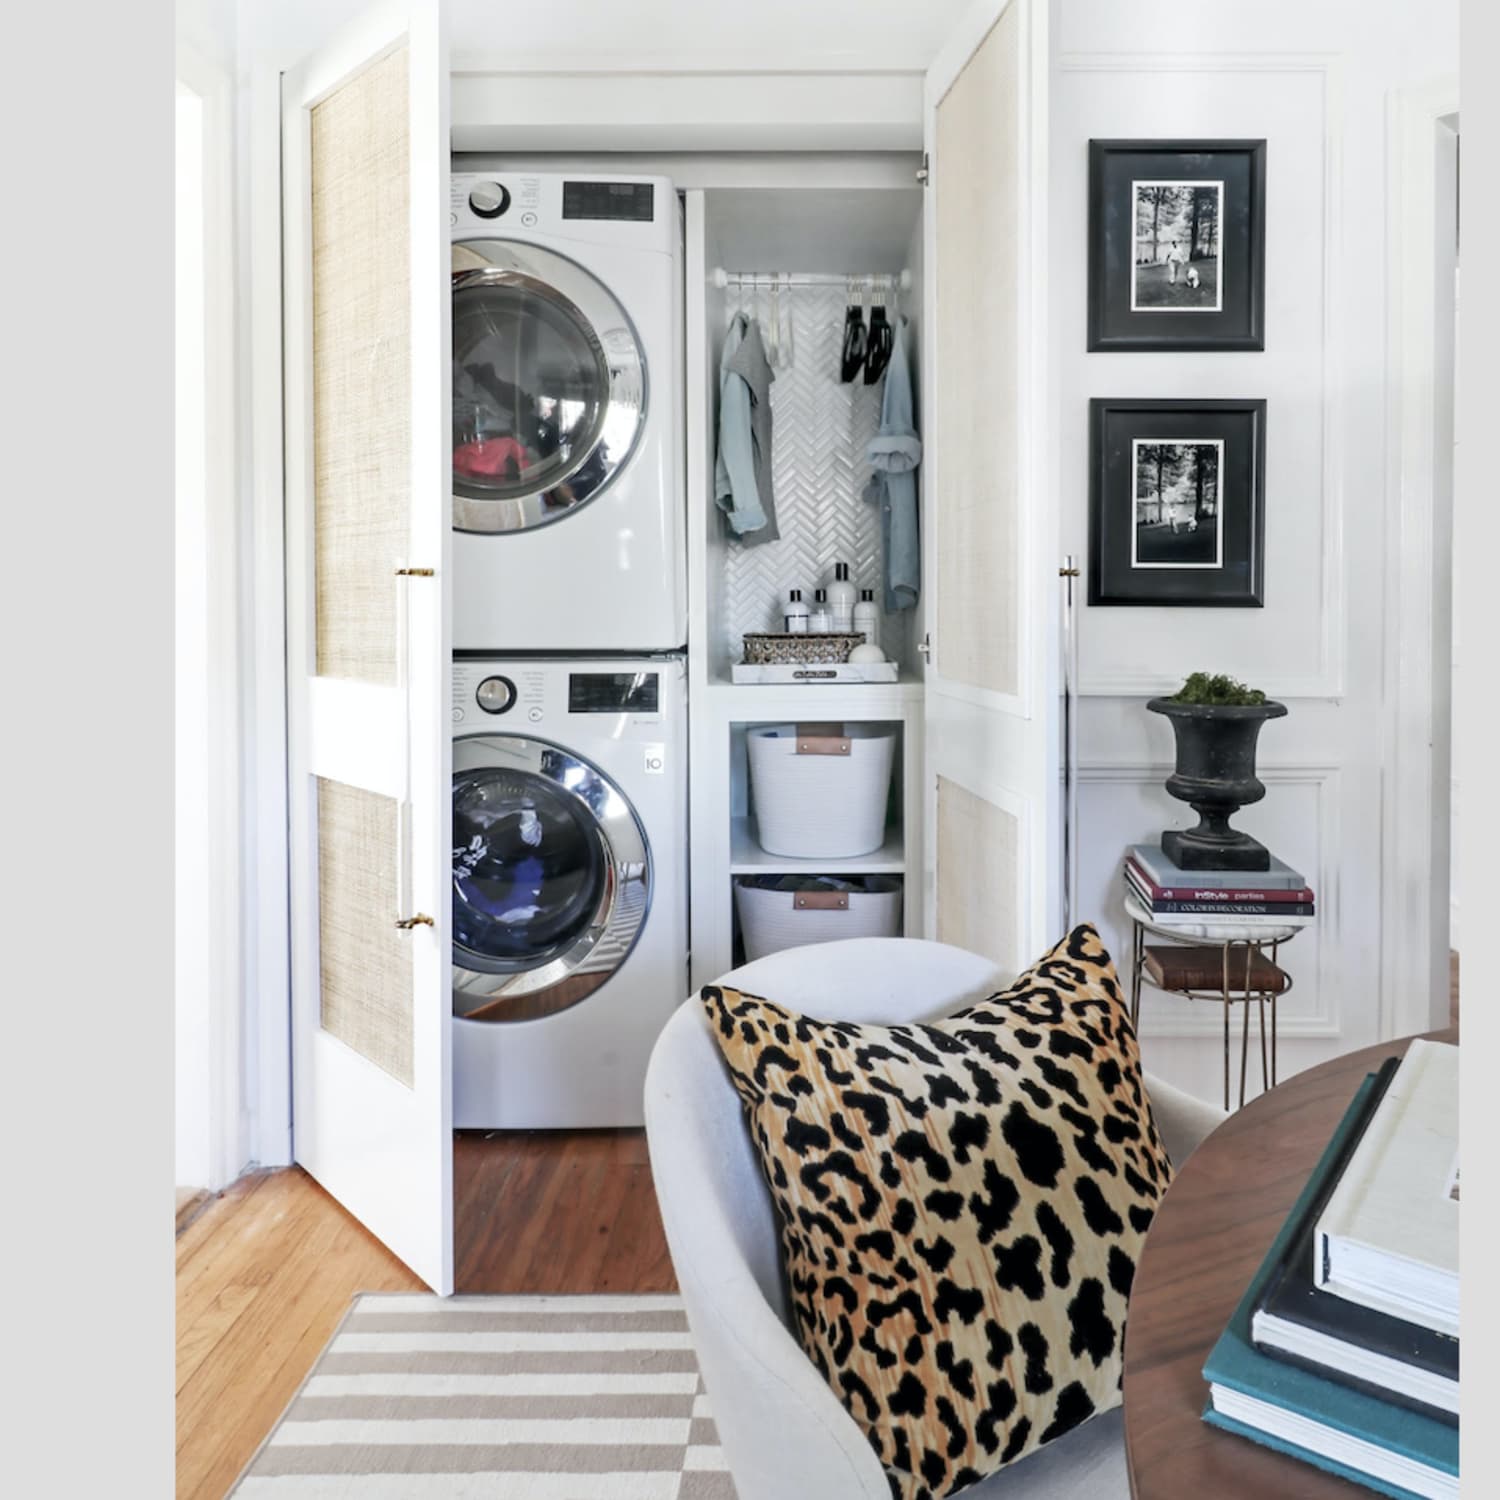 8 Small Laundry Room Ideas for Apartment, Condo and Co-op Dwellers